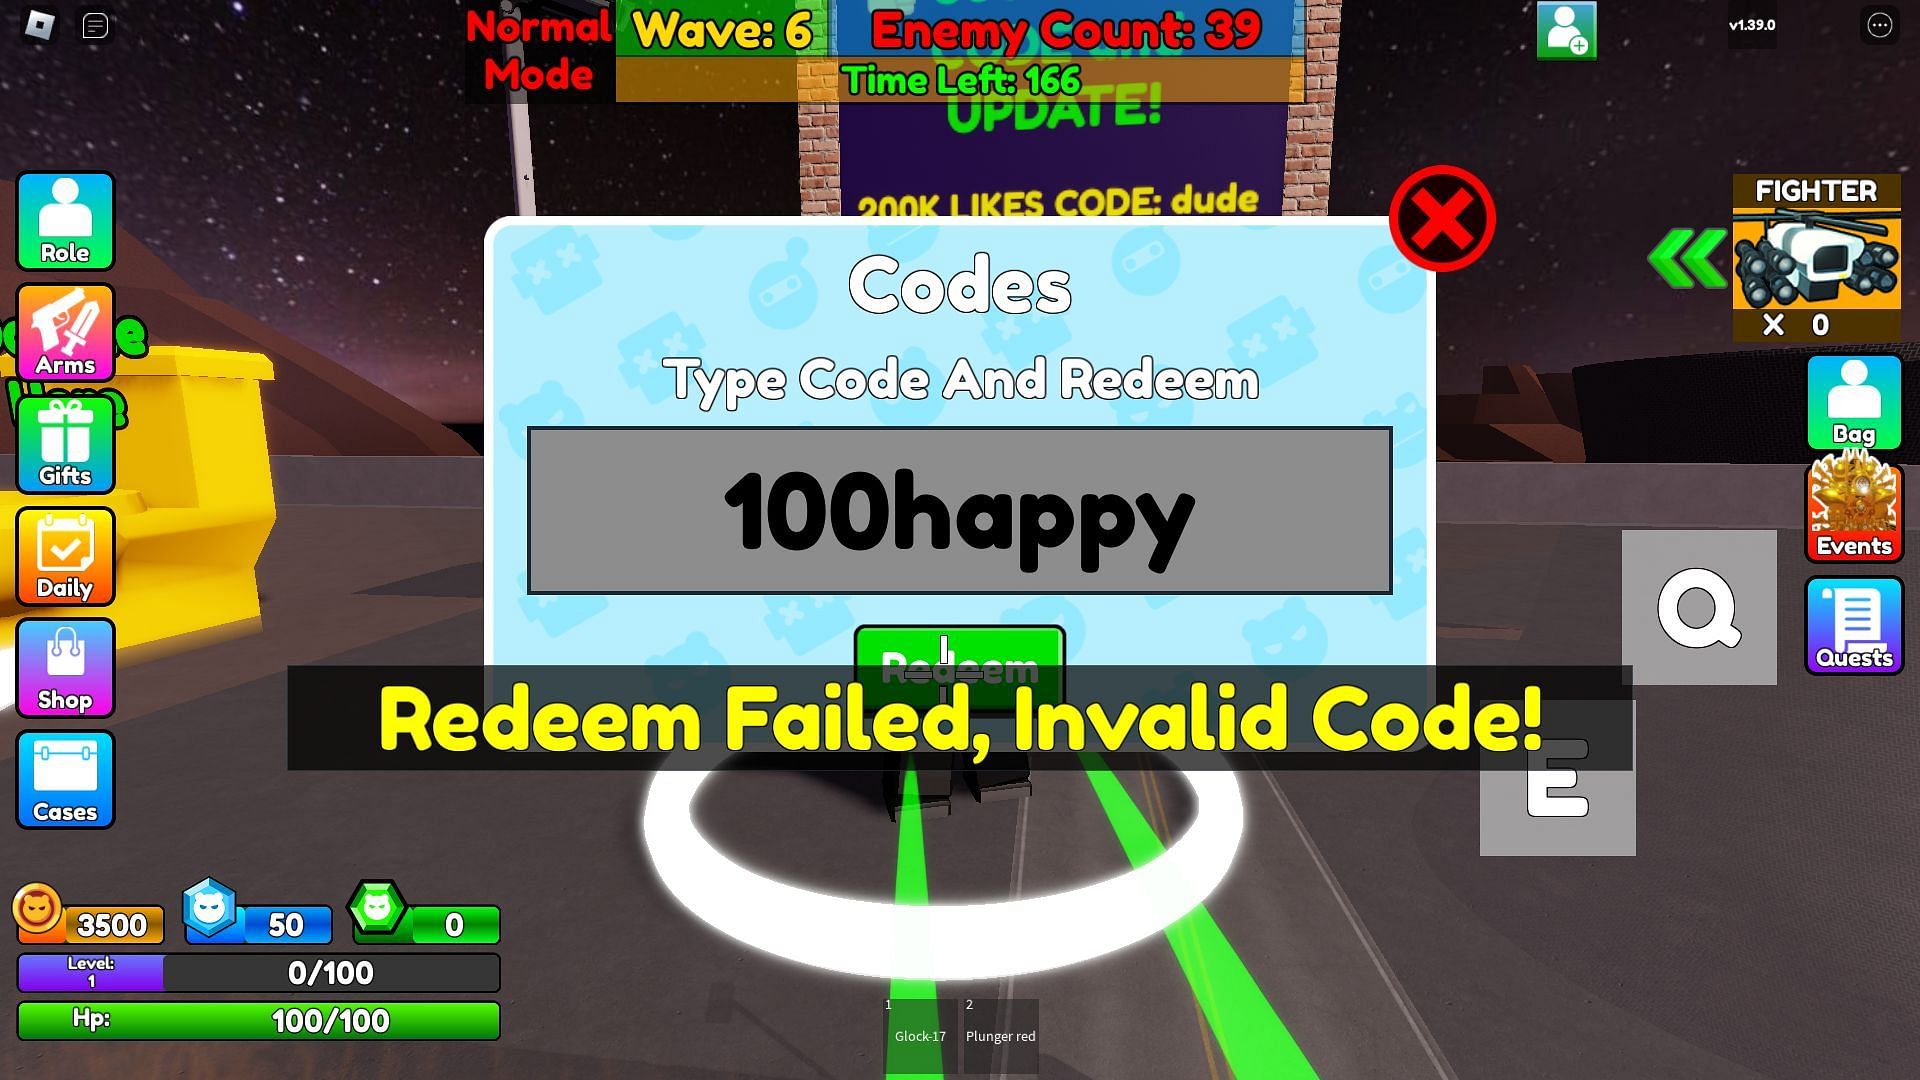 Troubleshooting codes for Bathroom Attack (Image via Roblox)